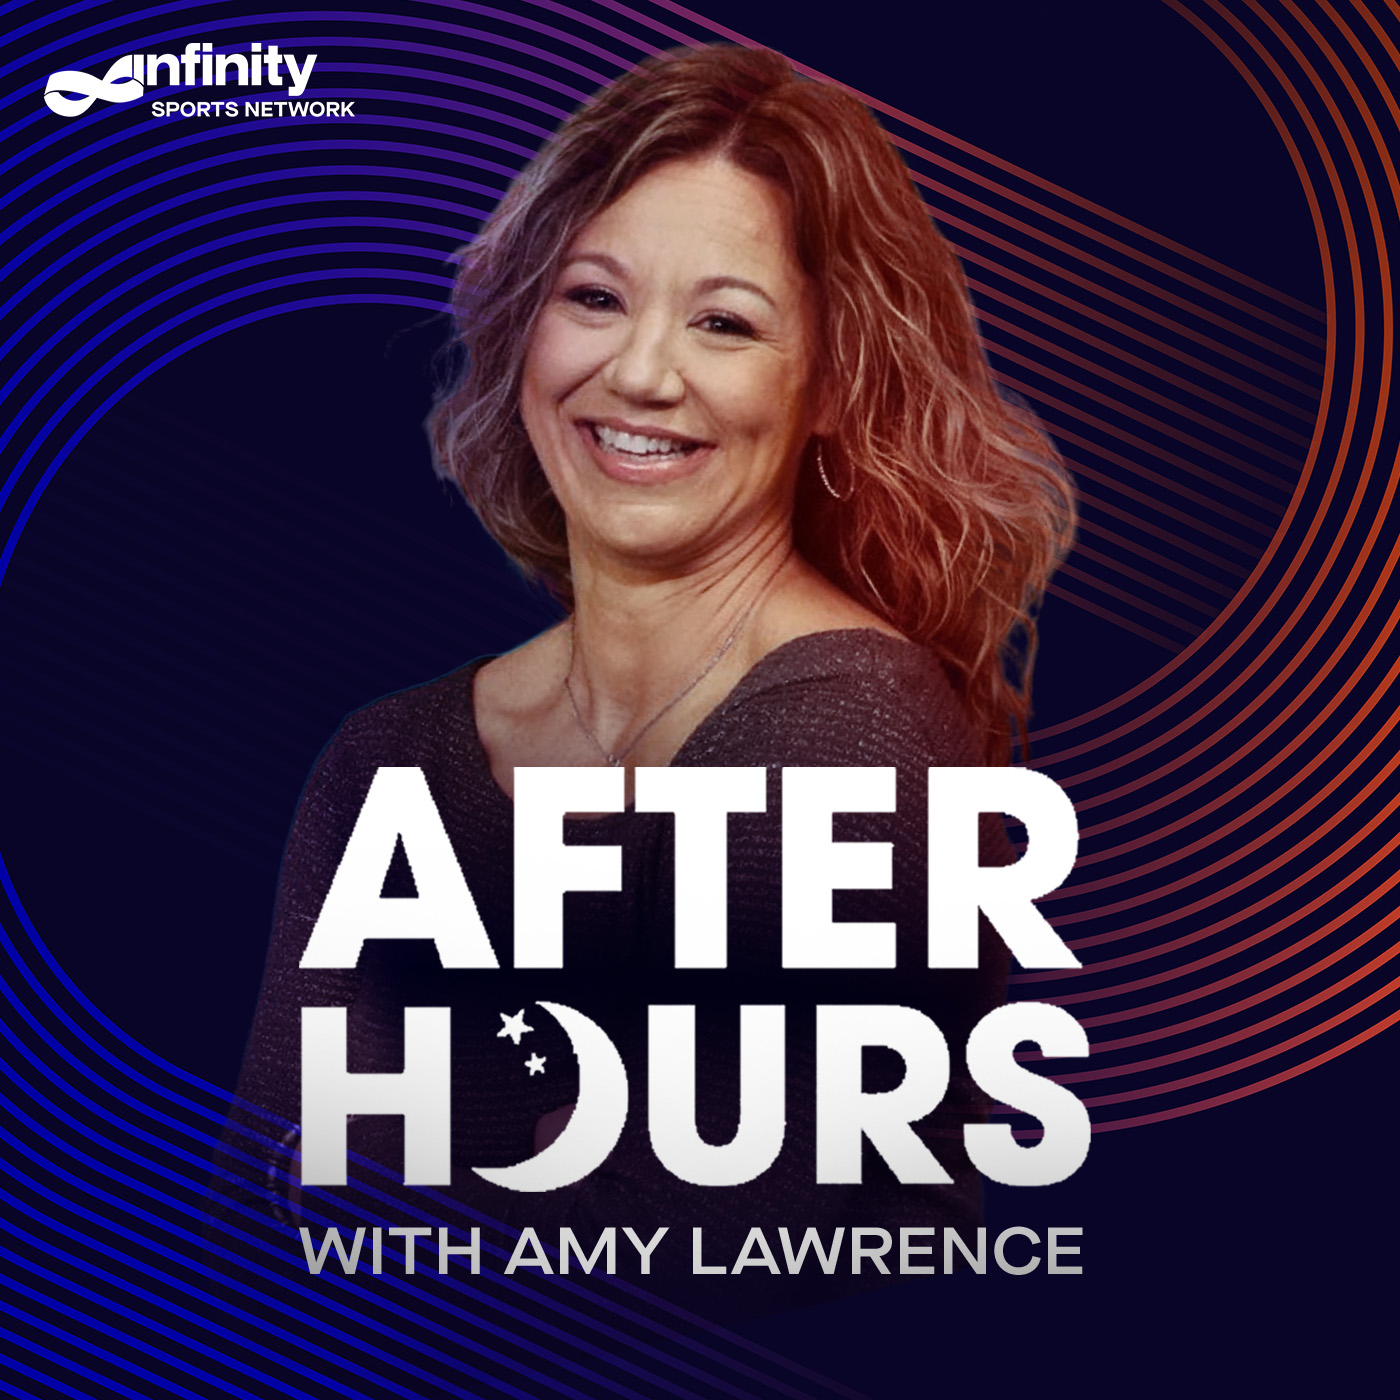 8-19-21 After Hours with Amy Lawrence PODCAST: Hour 4